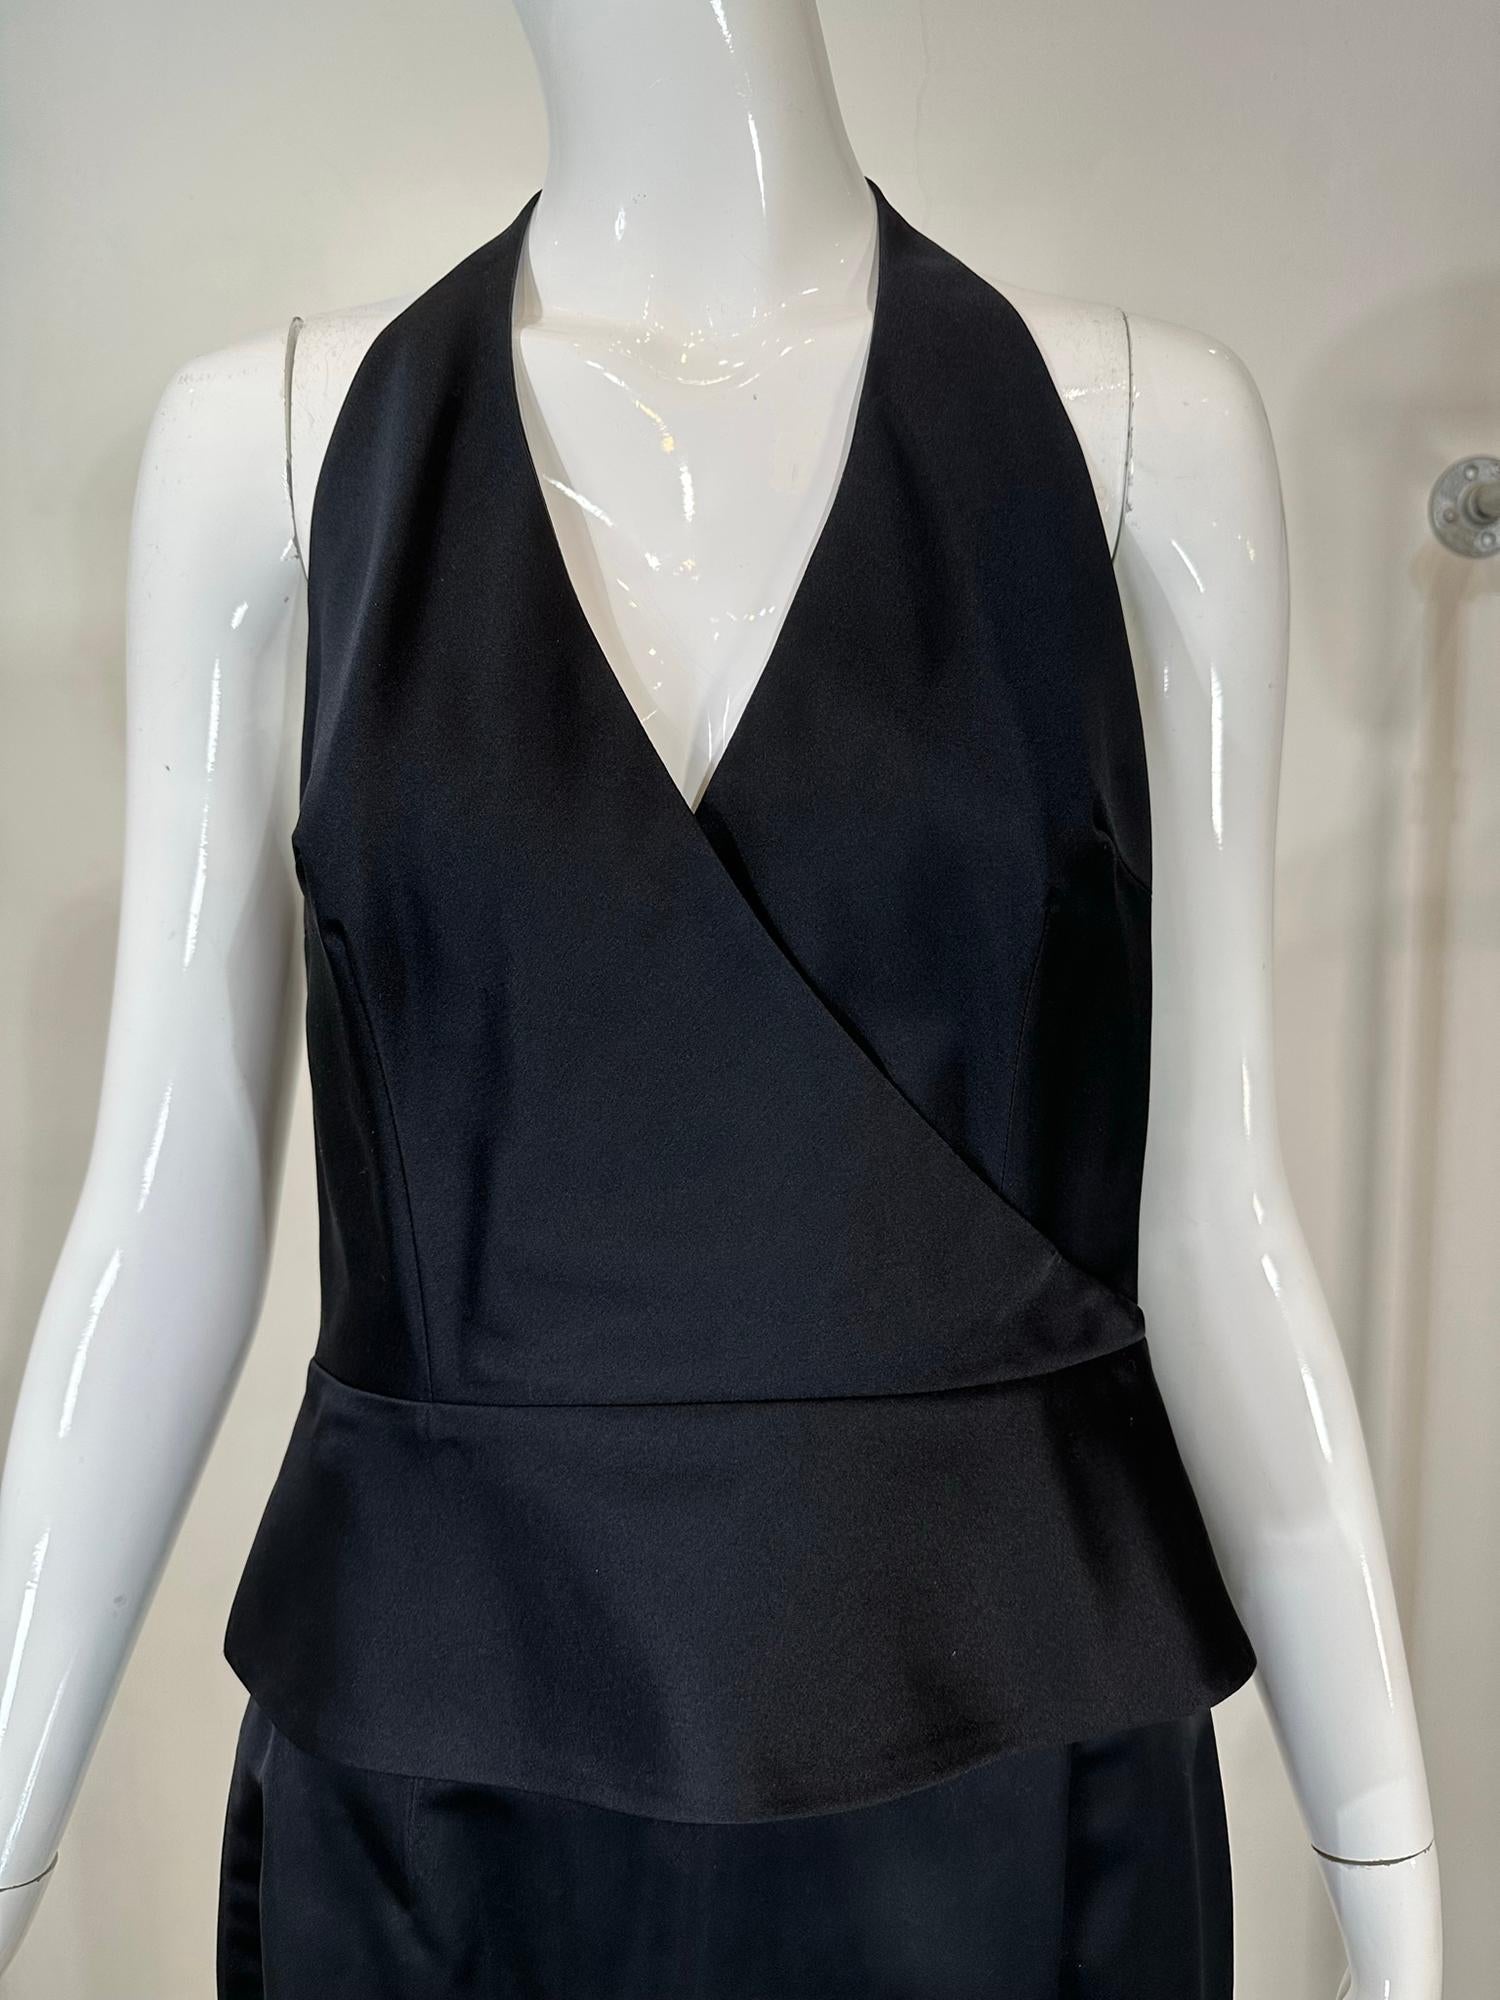 Richard Tyler Couture Black Silk Satin Halter Top & Pencil Skirt Early 2000s 6 In Good Condition For Sale In West Palm Beach, FL